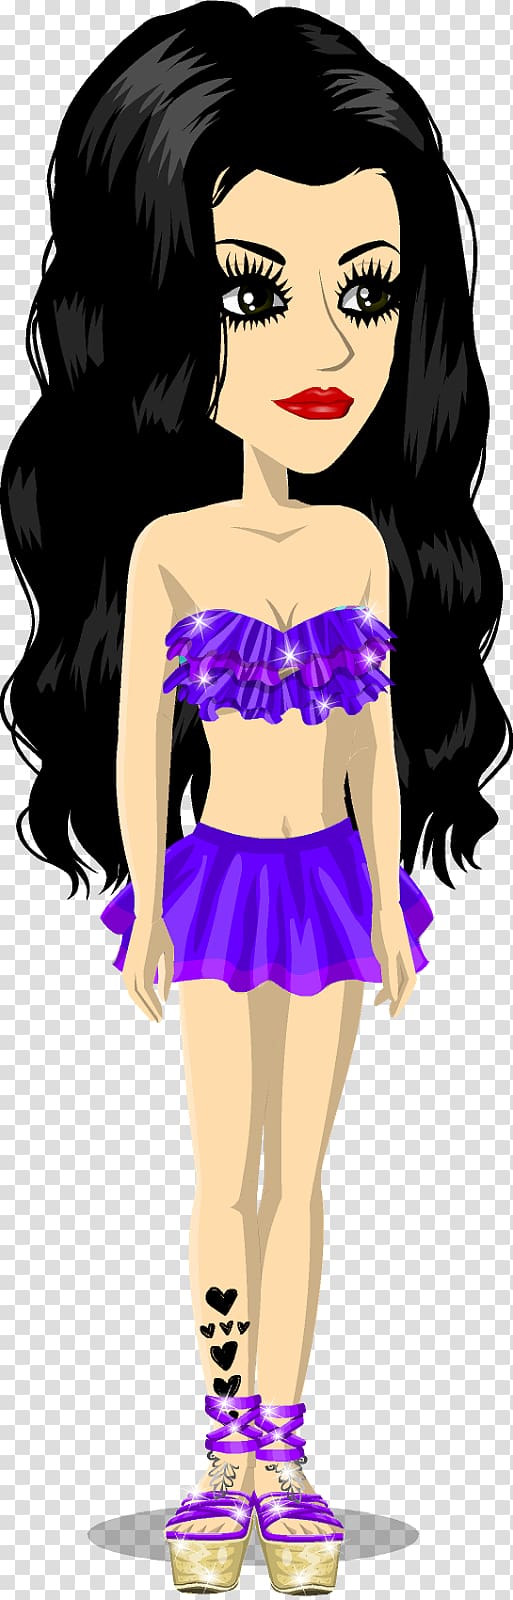 MovieStarPlanet Fashion Hairstyle Clothing Female, beach party transparent background PNG clipart